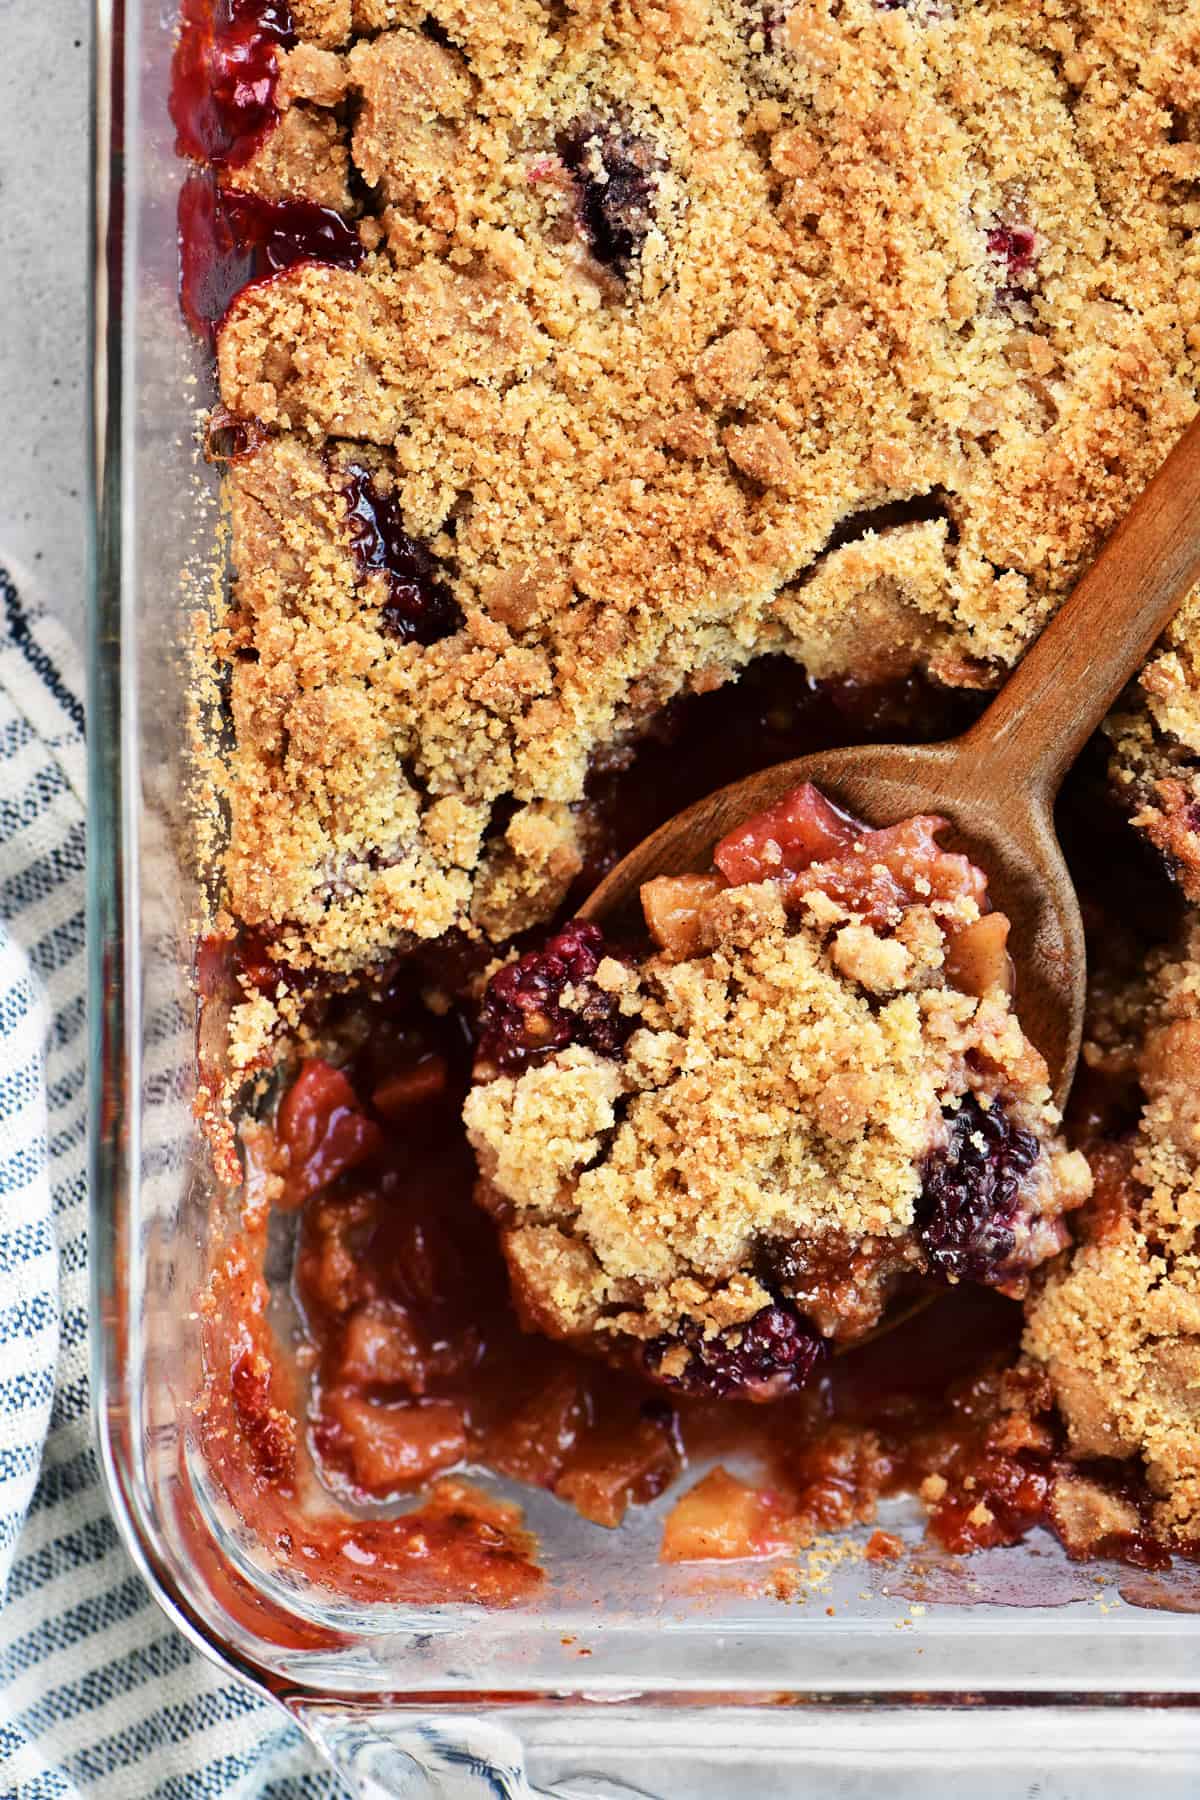 Apple and blackberry crumble in a pan with a wooden spoon.